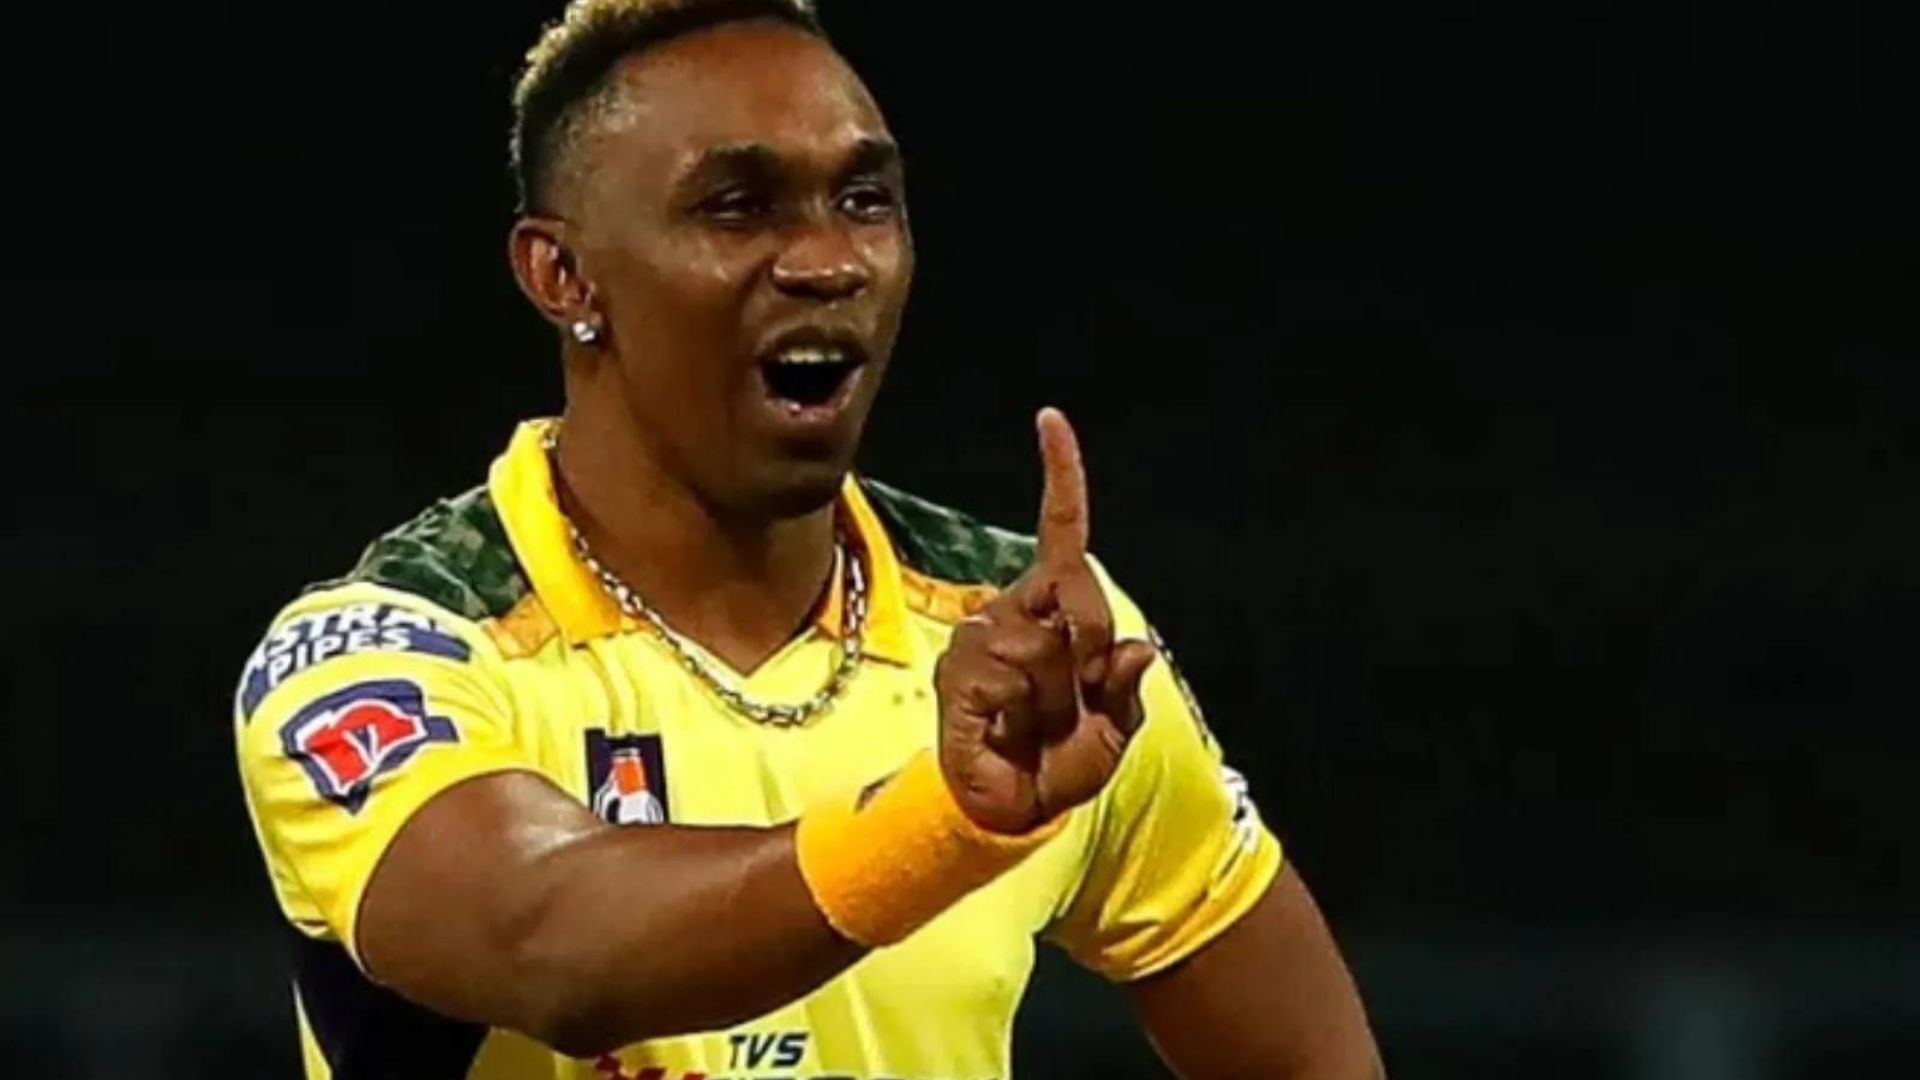 Dwayne Bravo is the highest wicket-taker in the history of the IPL. (P.C.:iplt20.com)